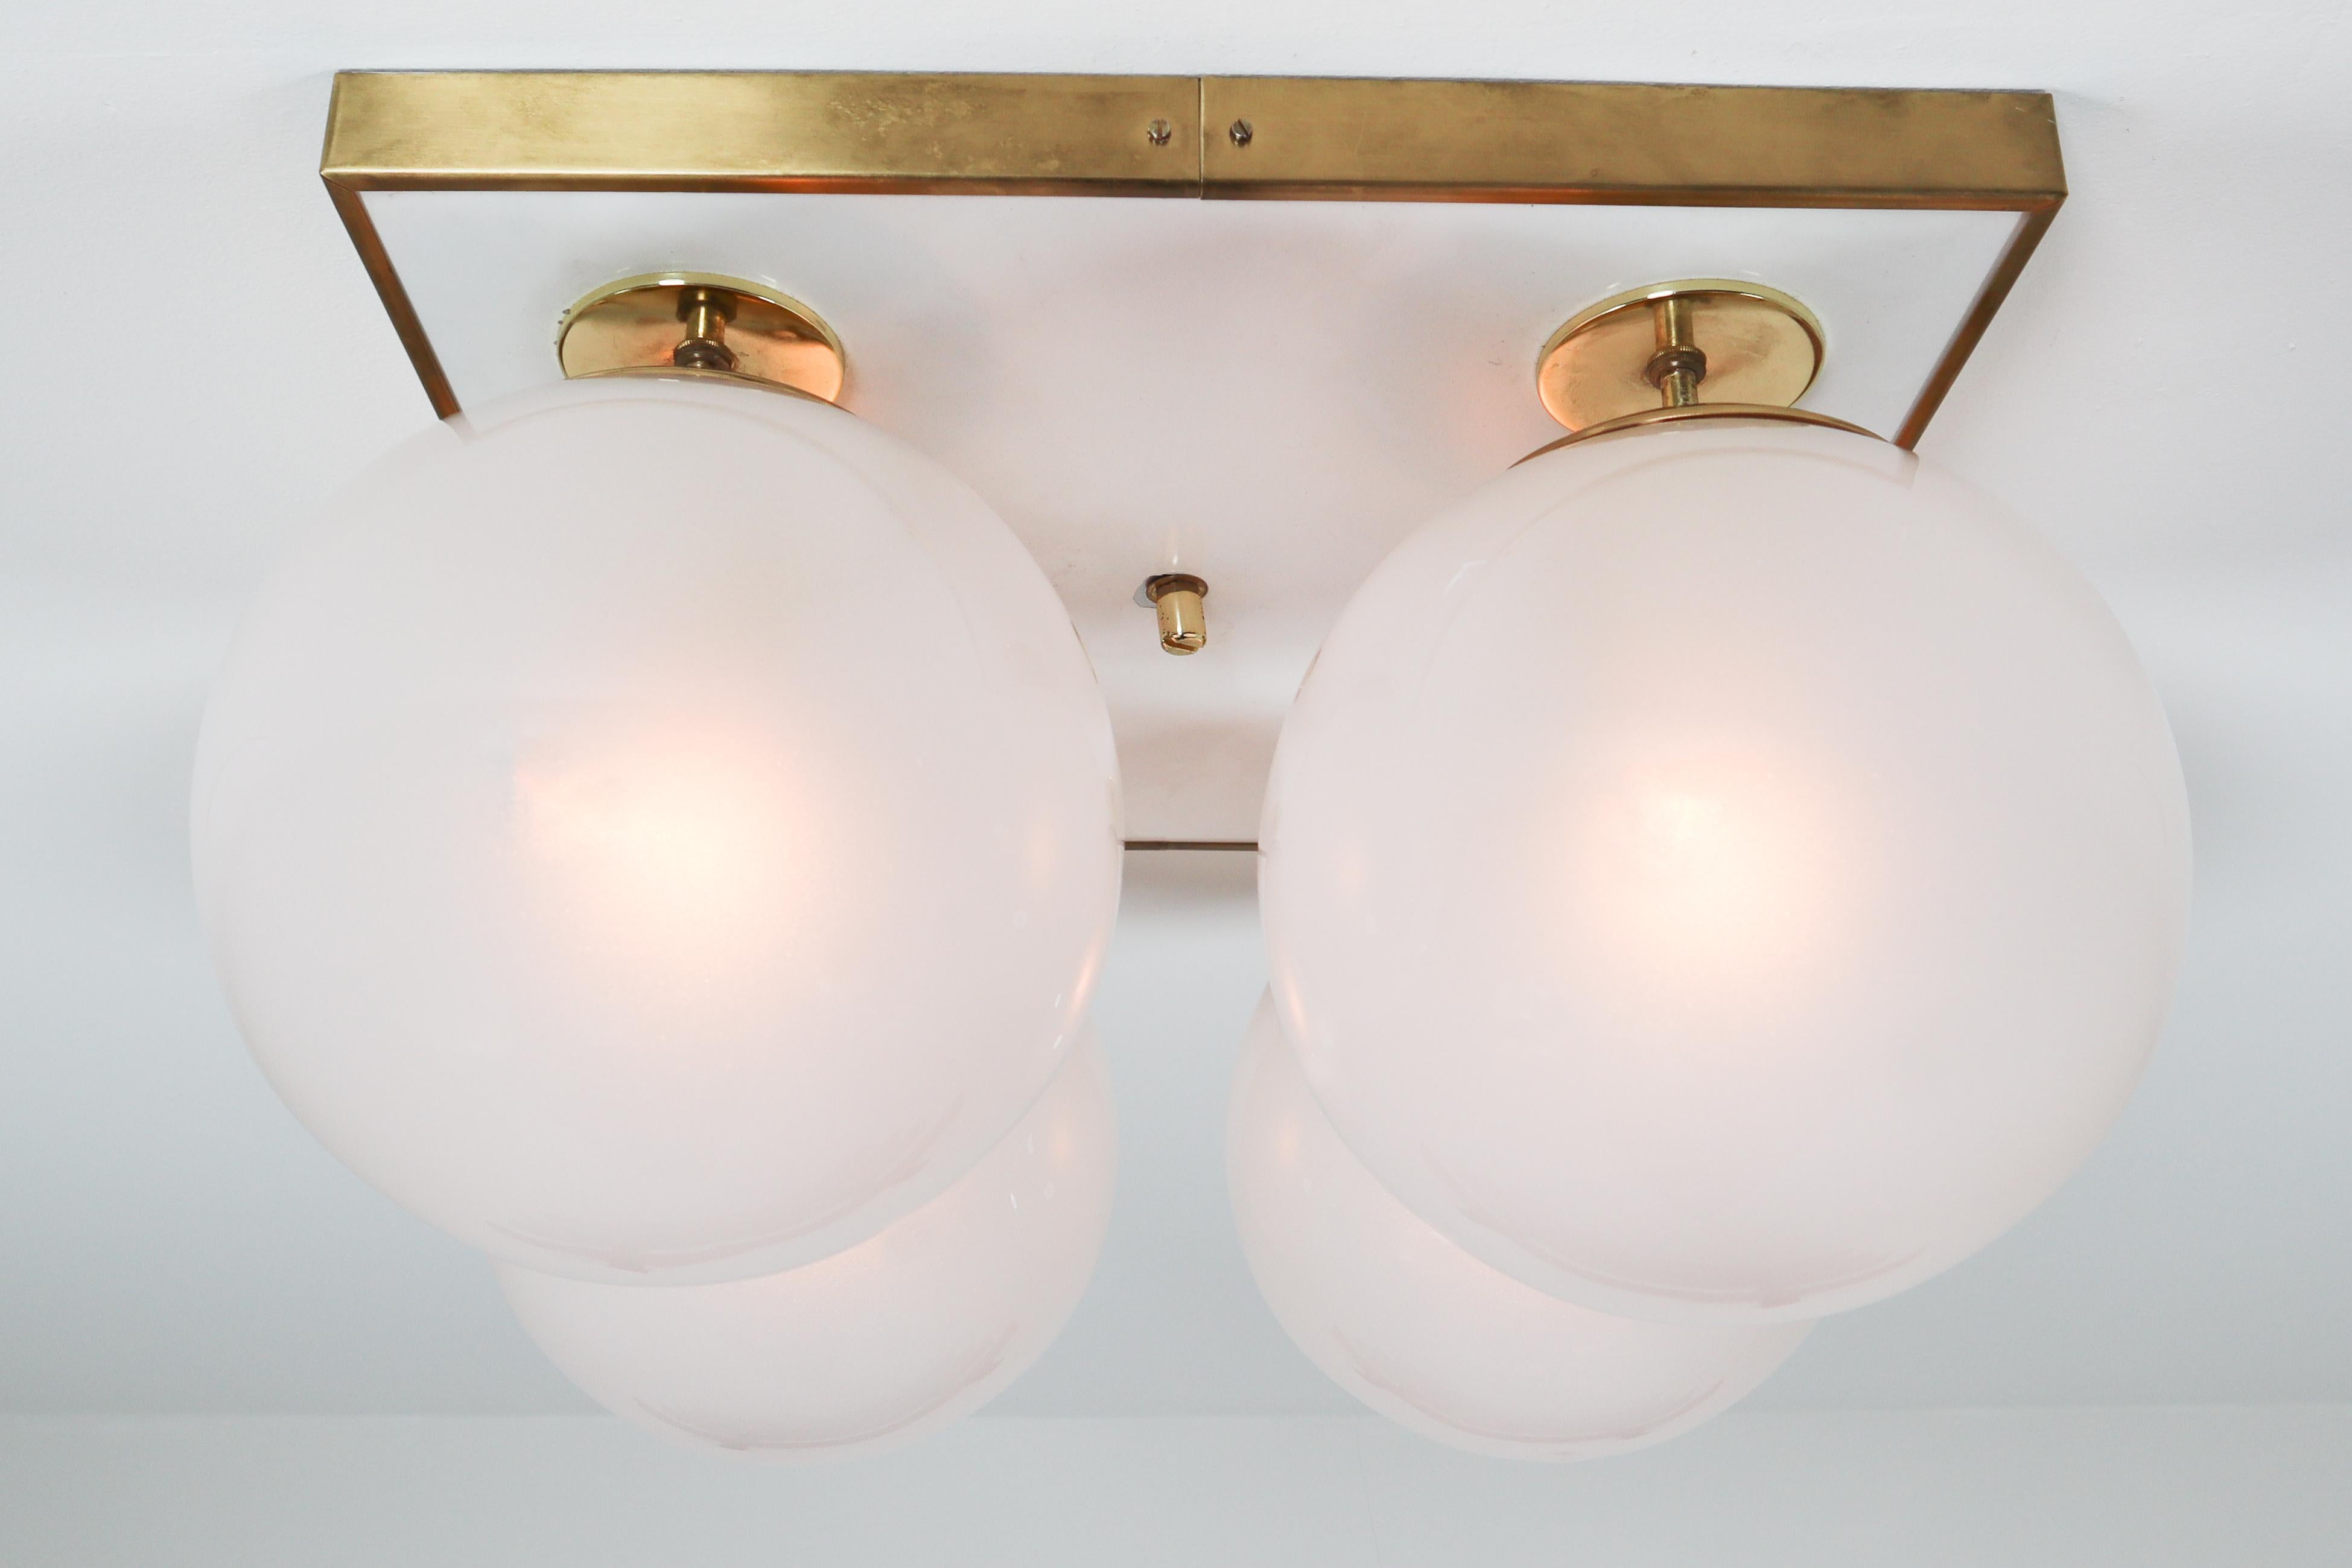  Mid-Century Brass Ceiling Lights with Four Pearl White Glass Globes In Good Condition For Sale In Almelo, NL